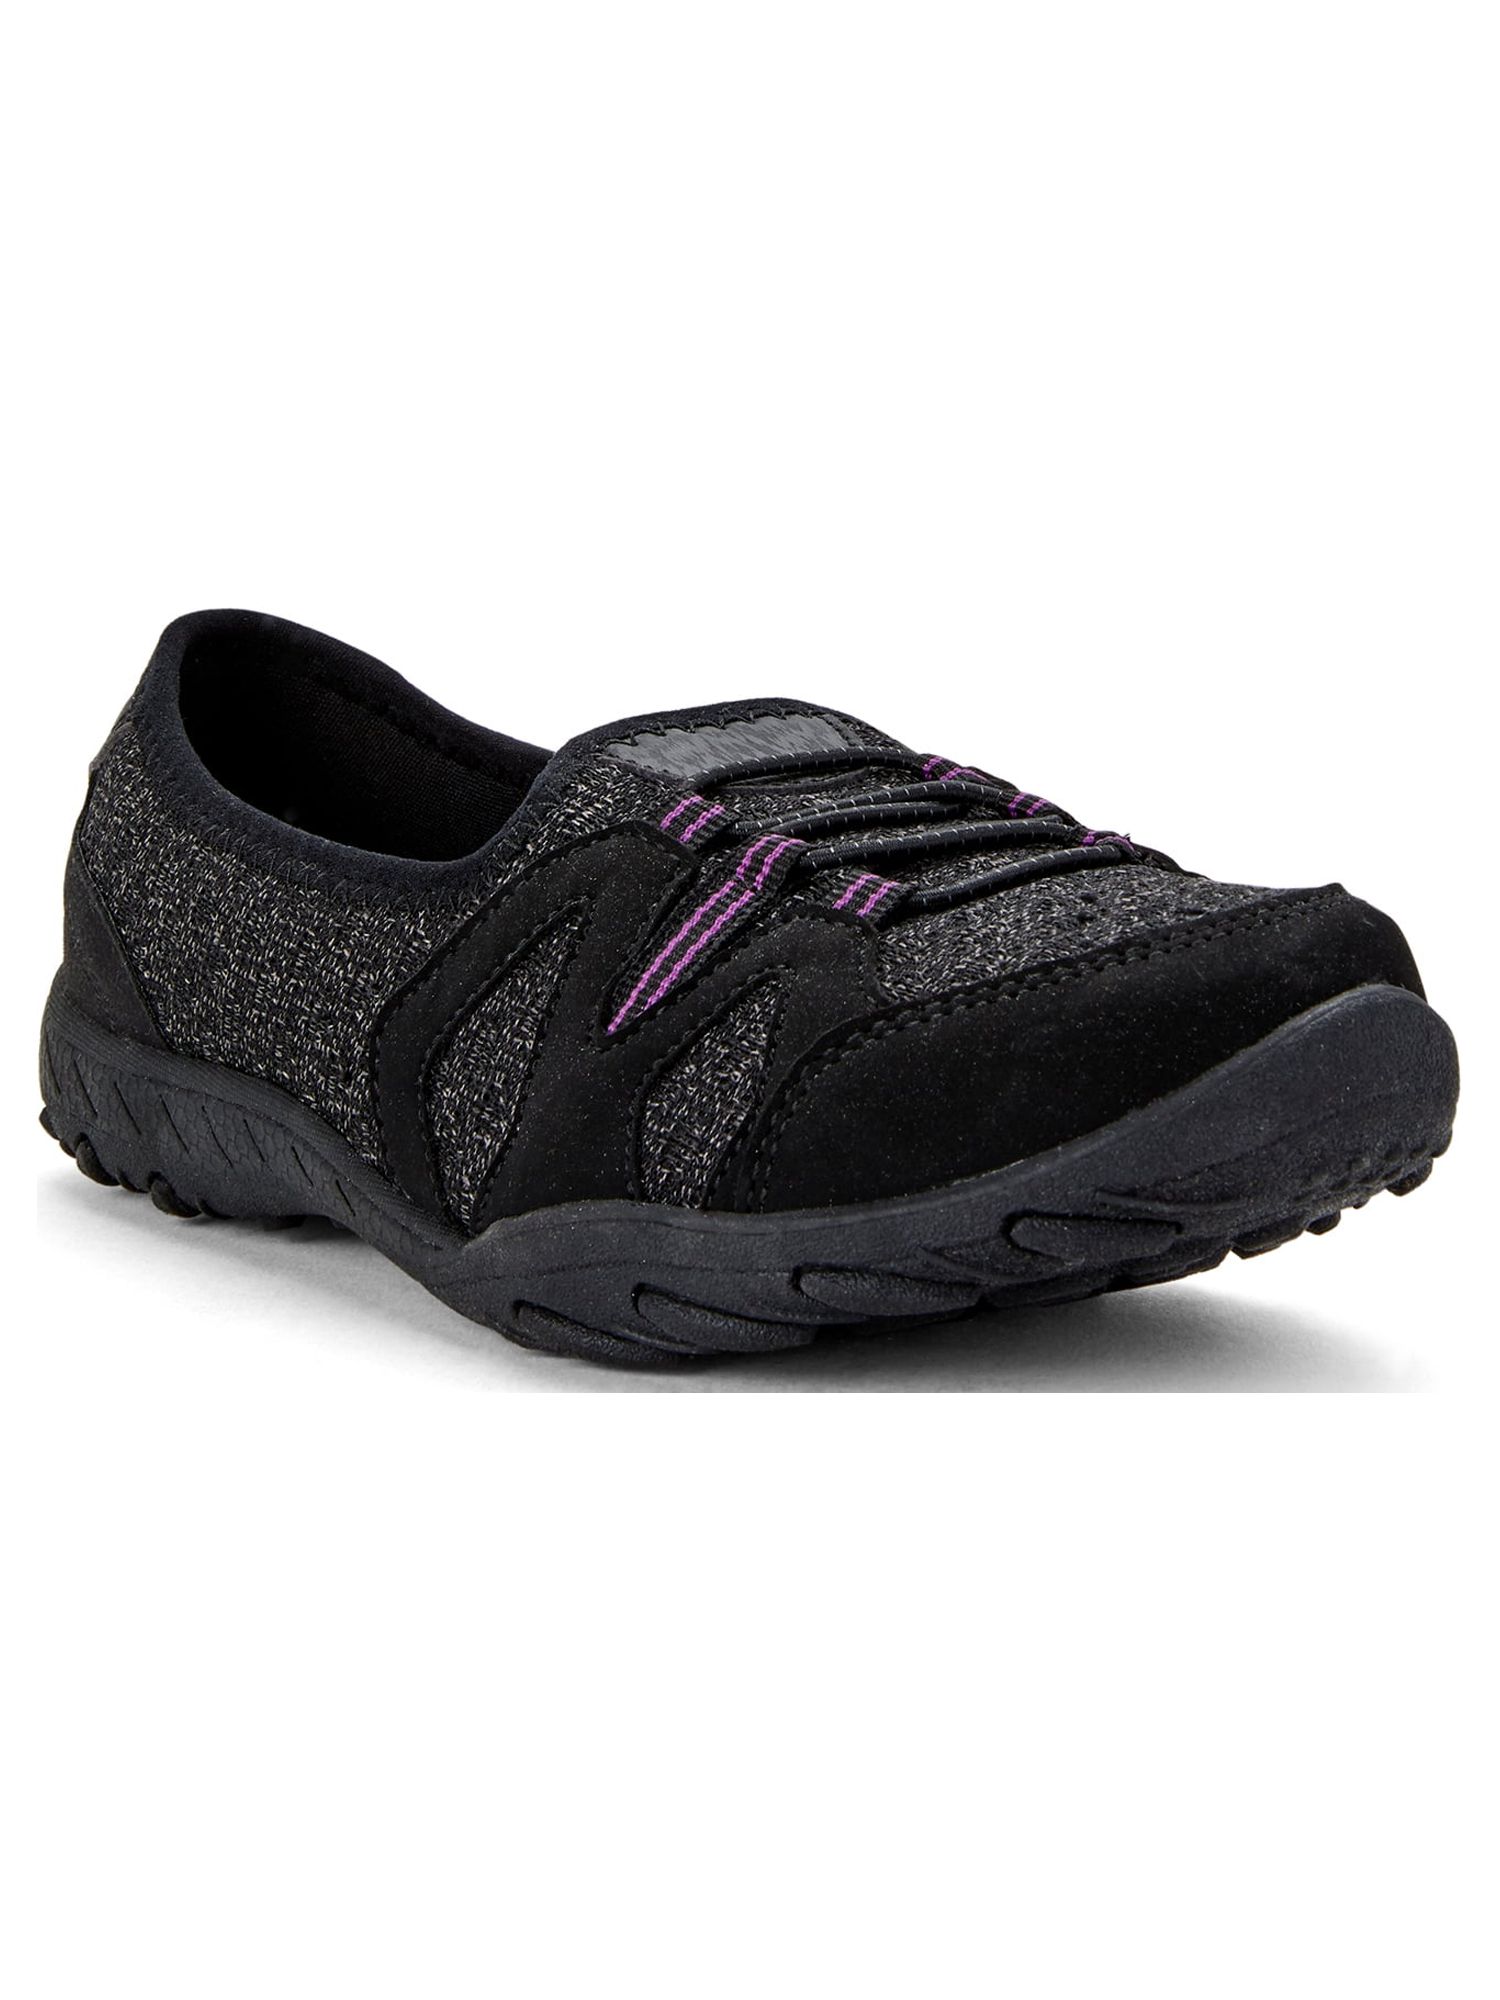 Athletic Works Women's Low Bungee Sneaker (Wide Width Available) - image 1 of 6